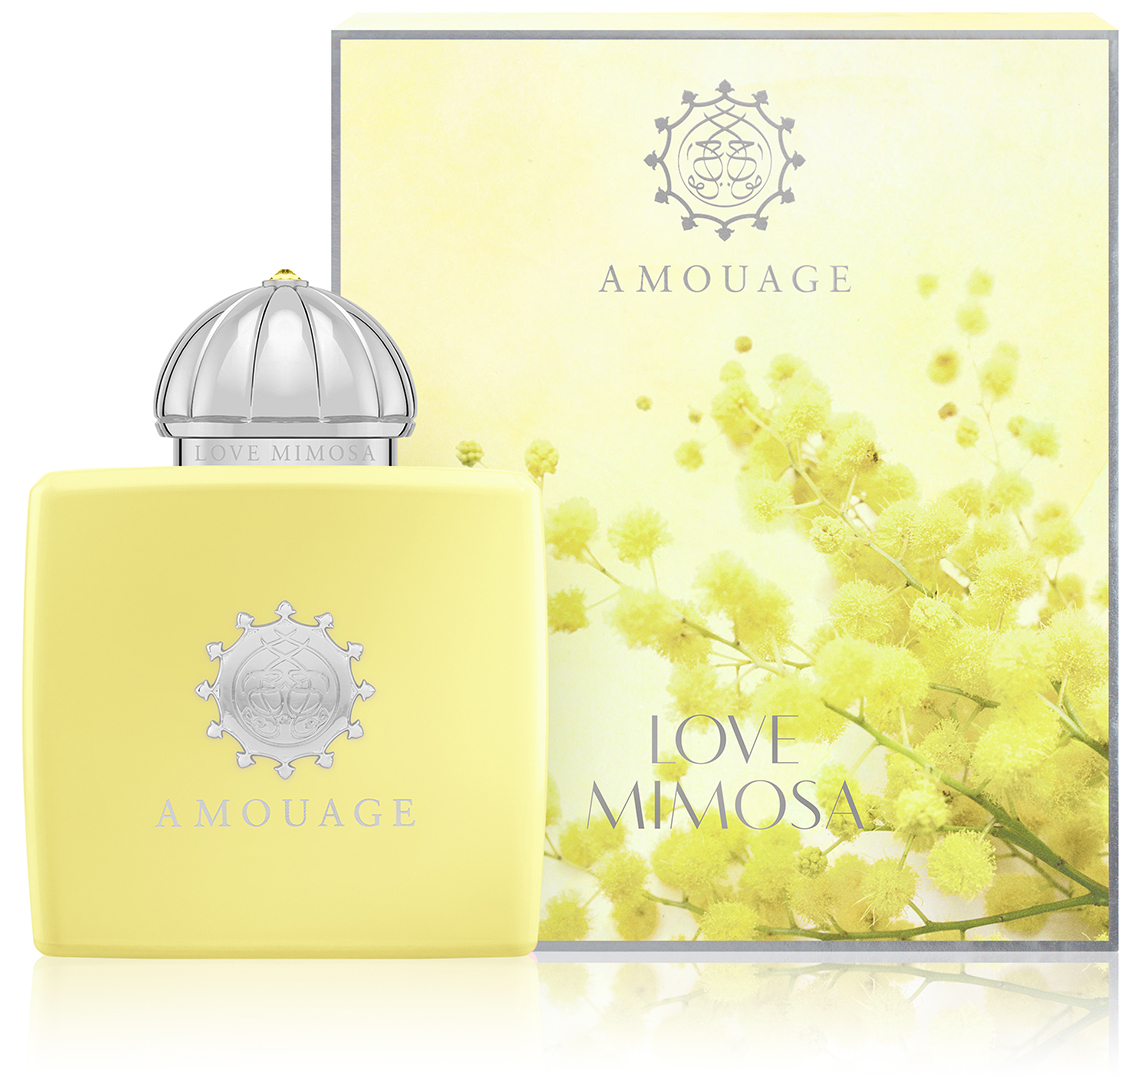 Love Mimosa Amouage perfume - a new fragrance for women 2019